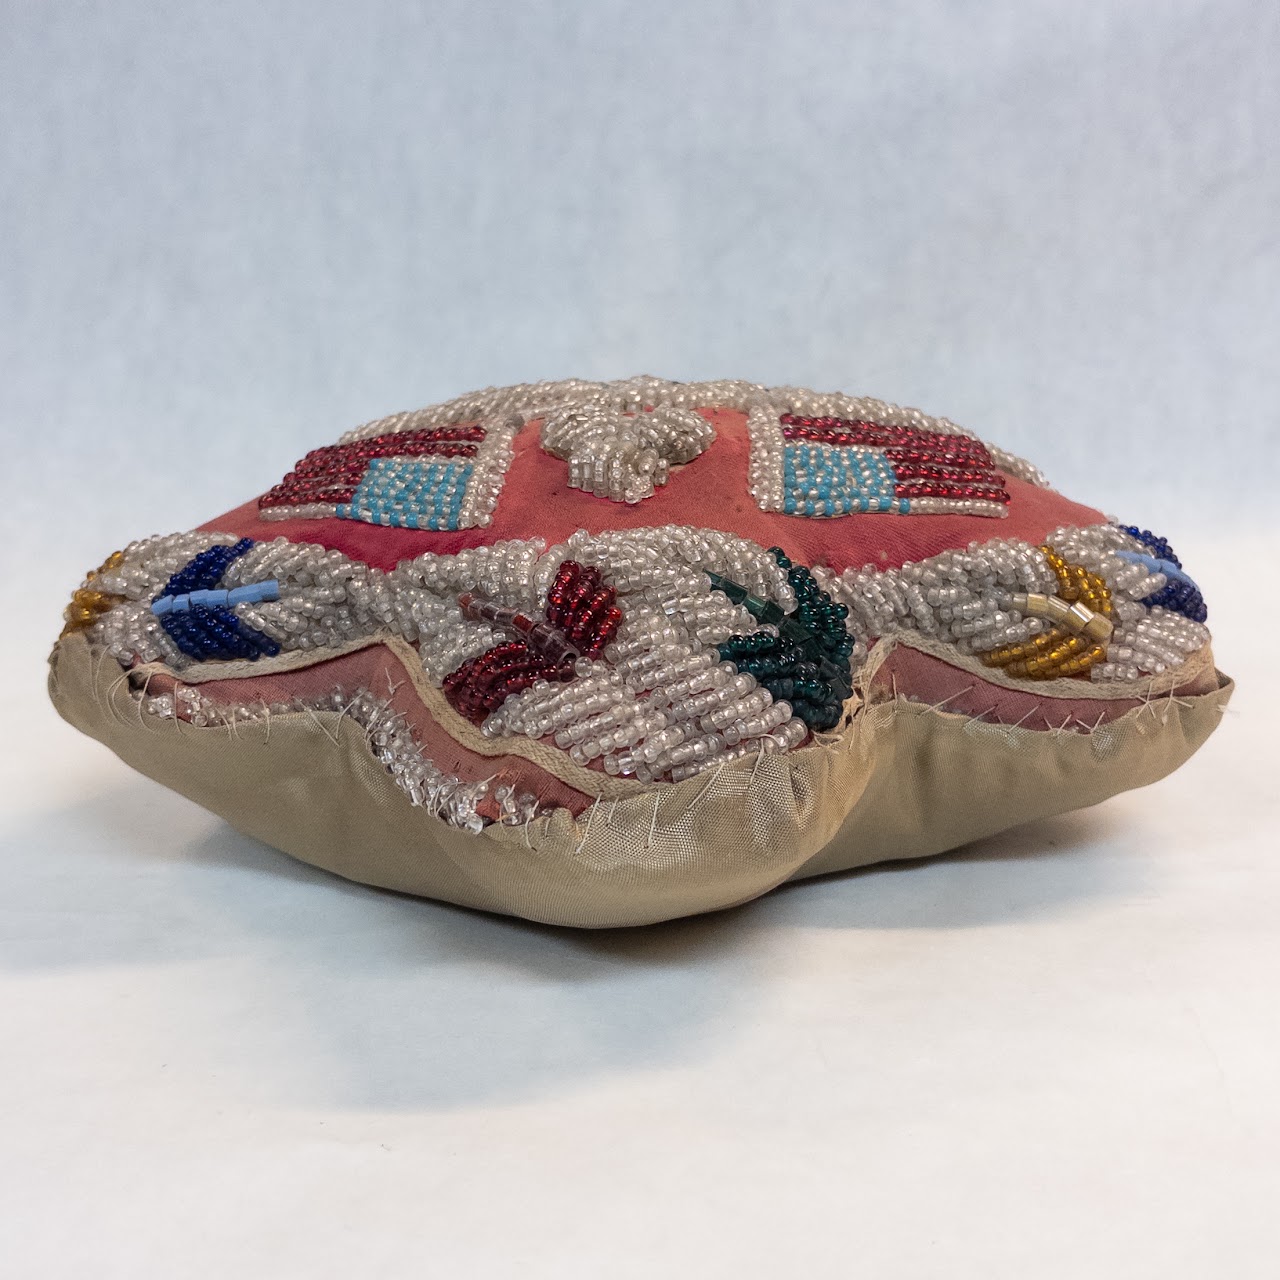 Iroquois Beaded Antique Pin Cushion